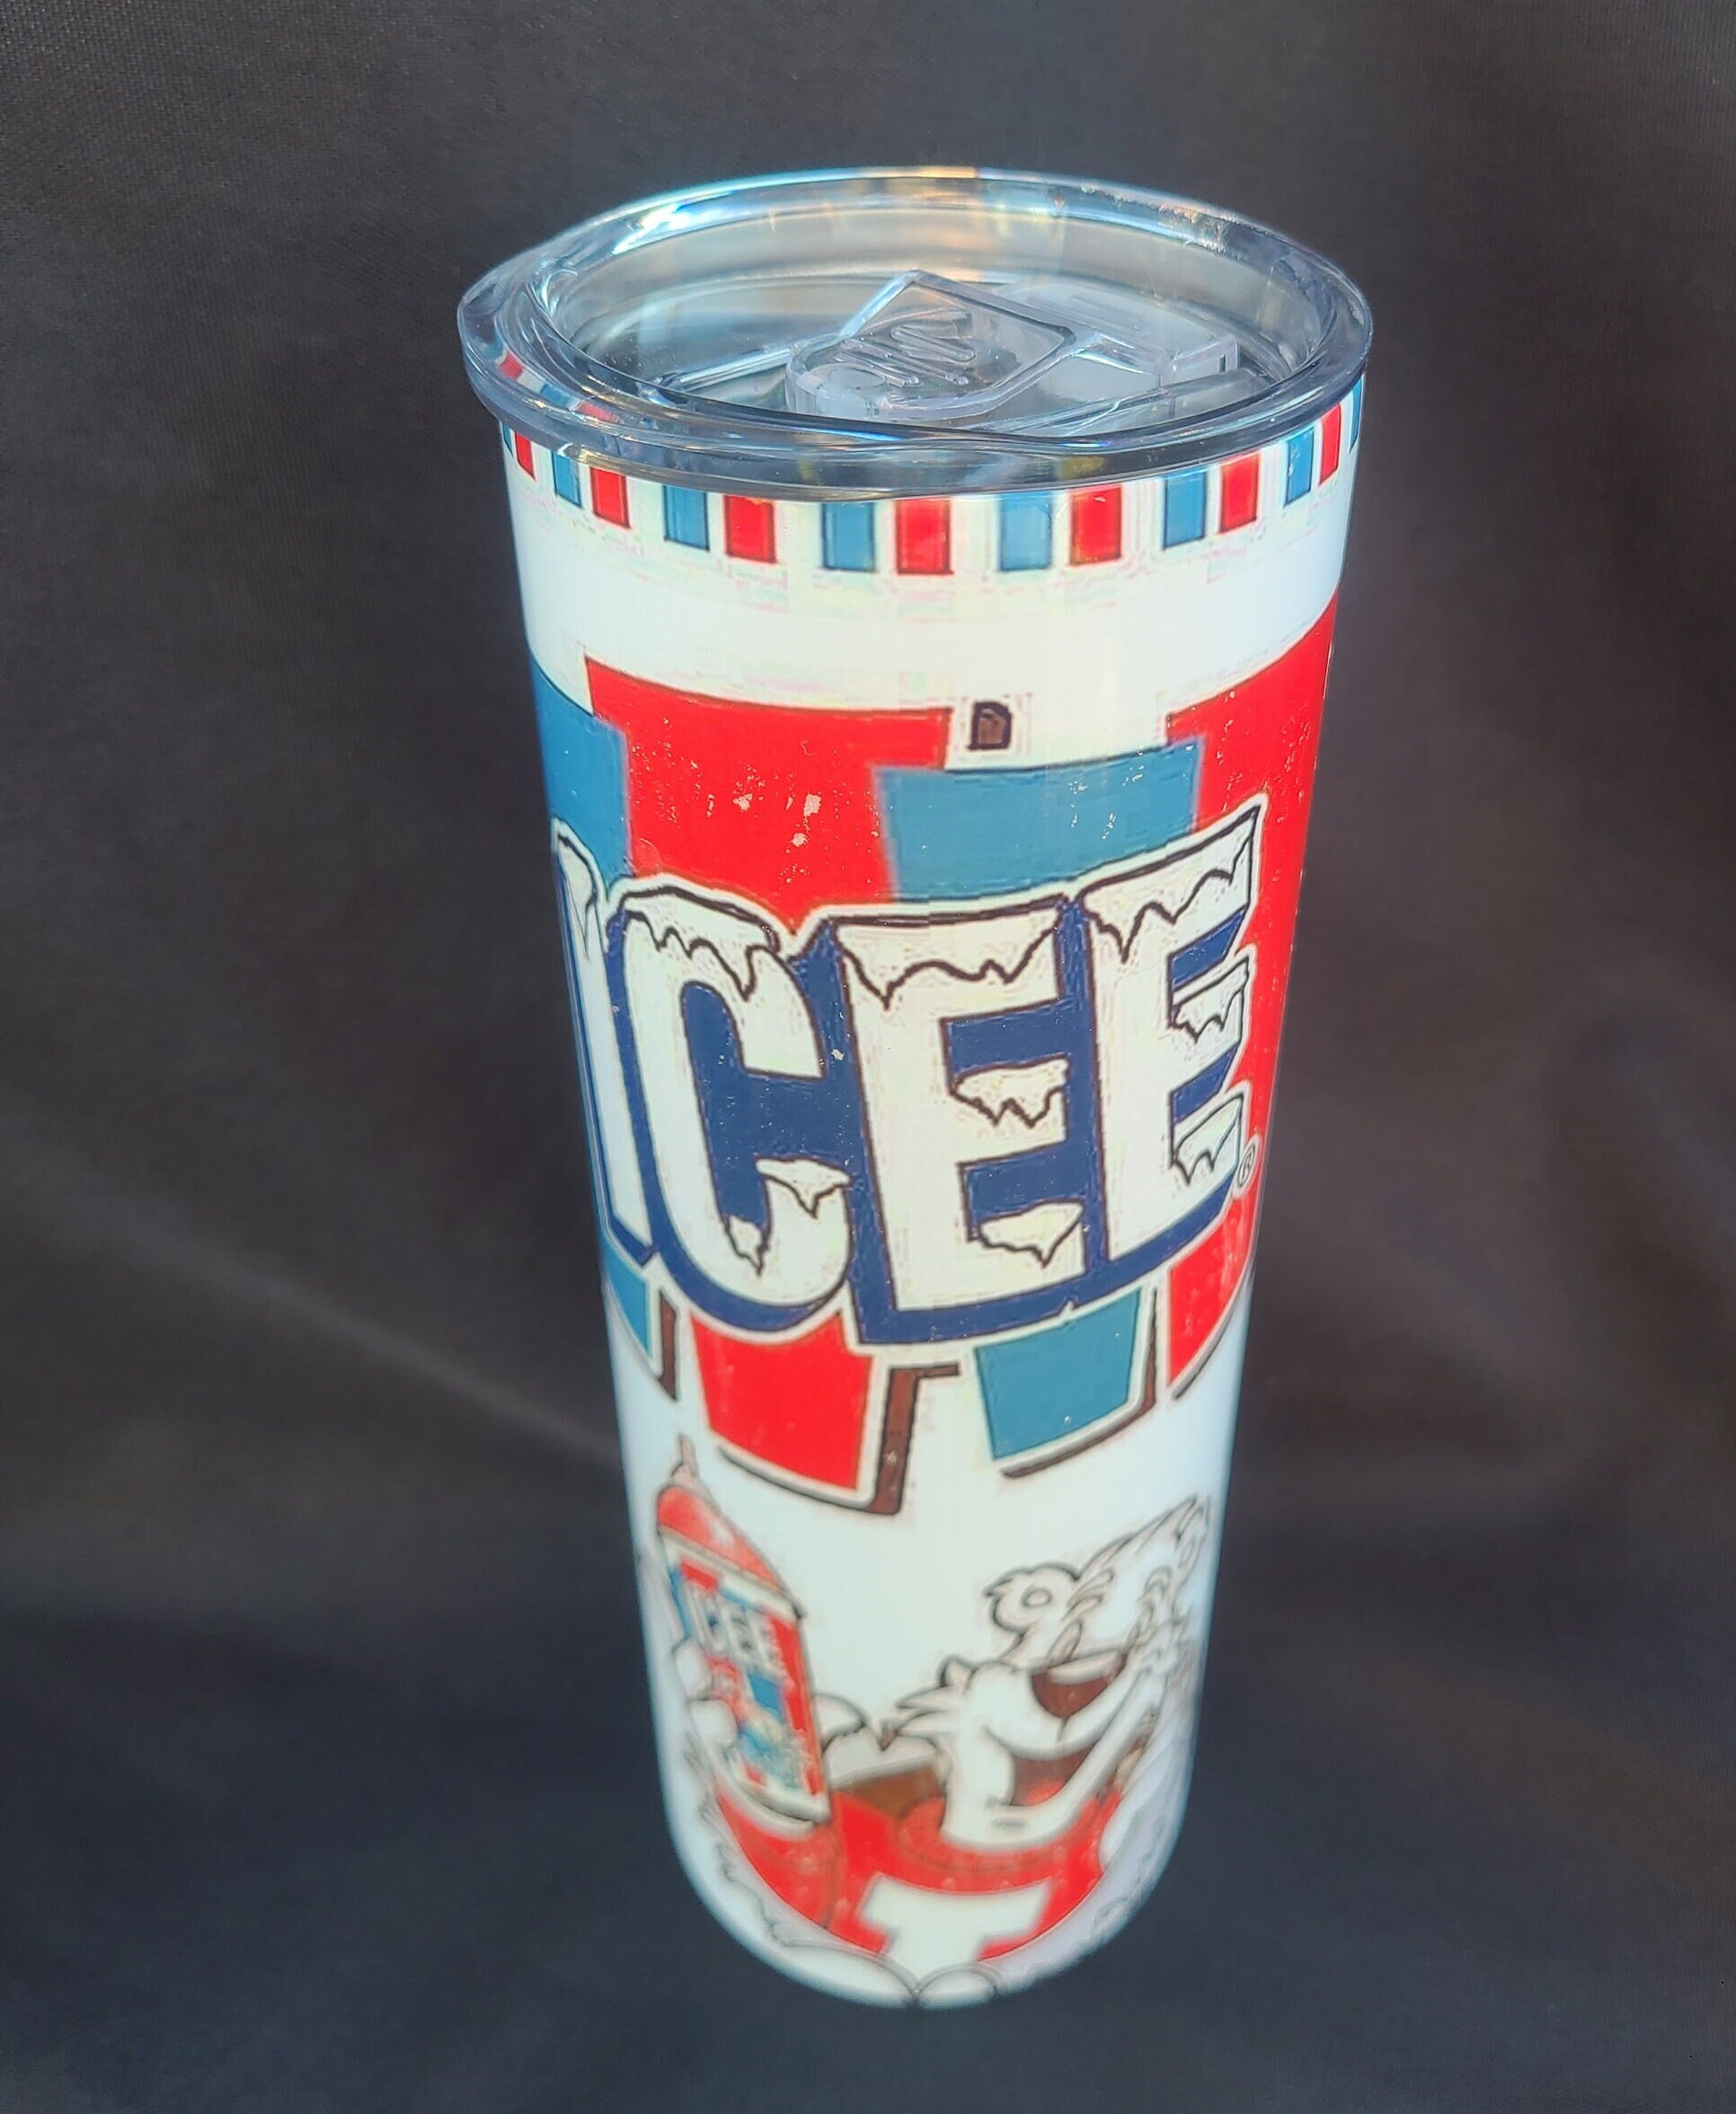 Magical ICEE Water-resistant Sparkly Stickers 